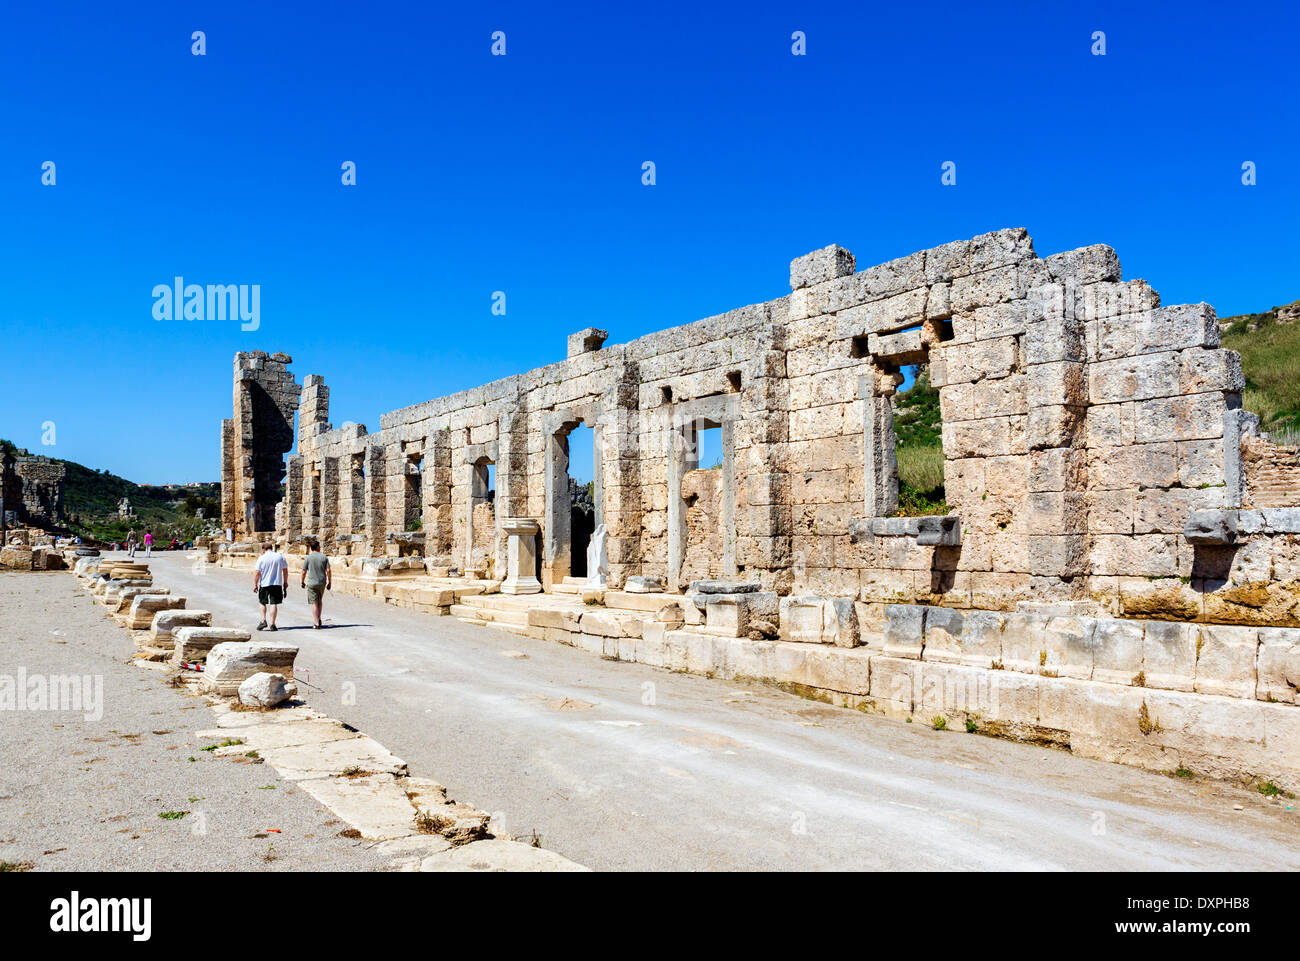 Area near the Palaestra in the ruins of the ancient city of Perge, Pamphylia, Antalya Province, Turkey Stock Photo